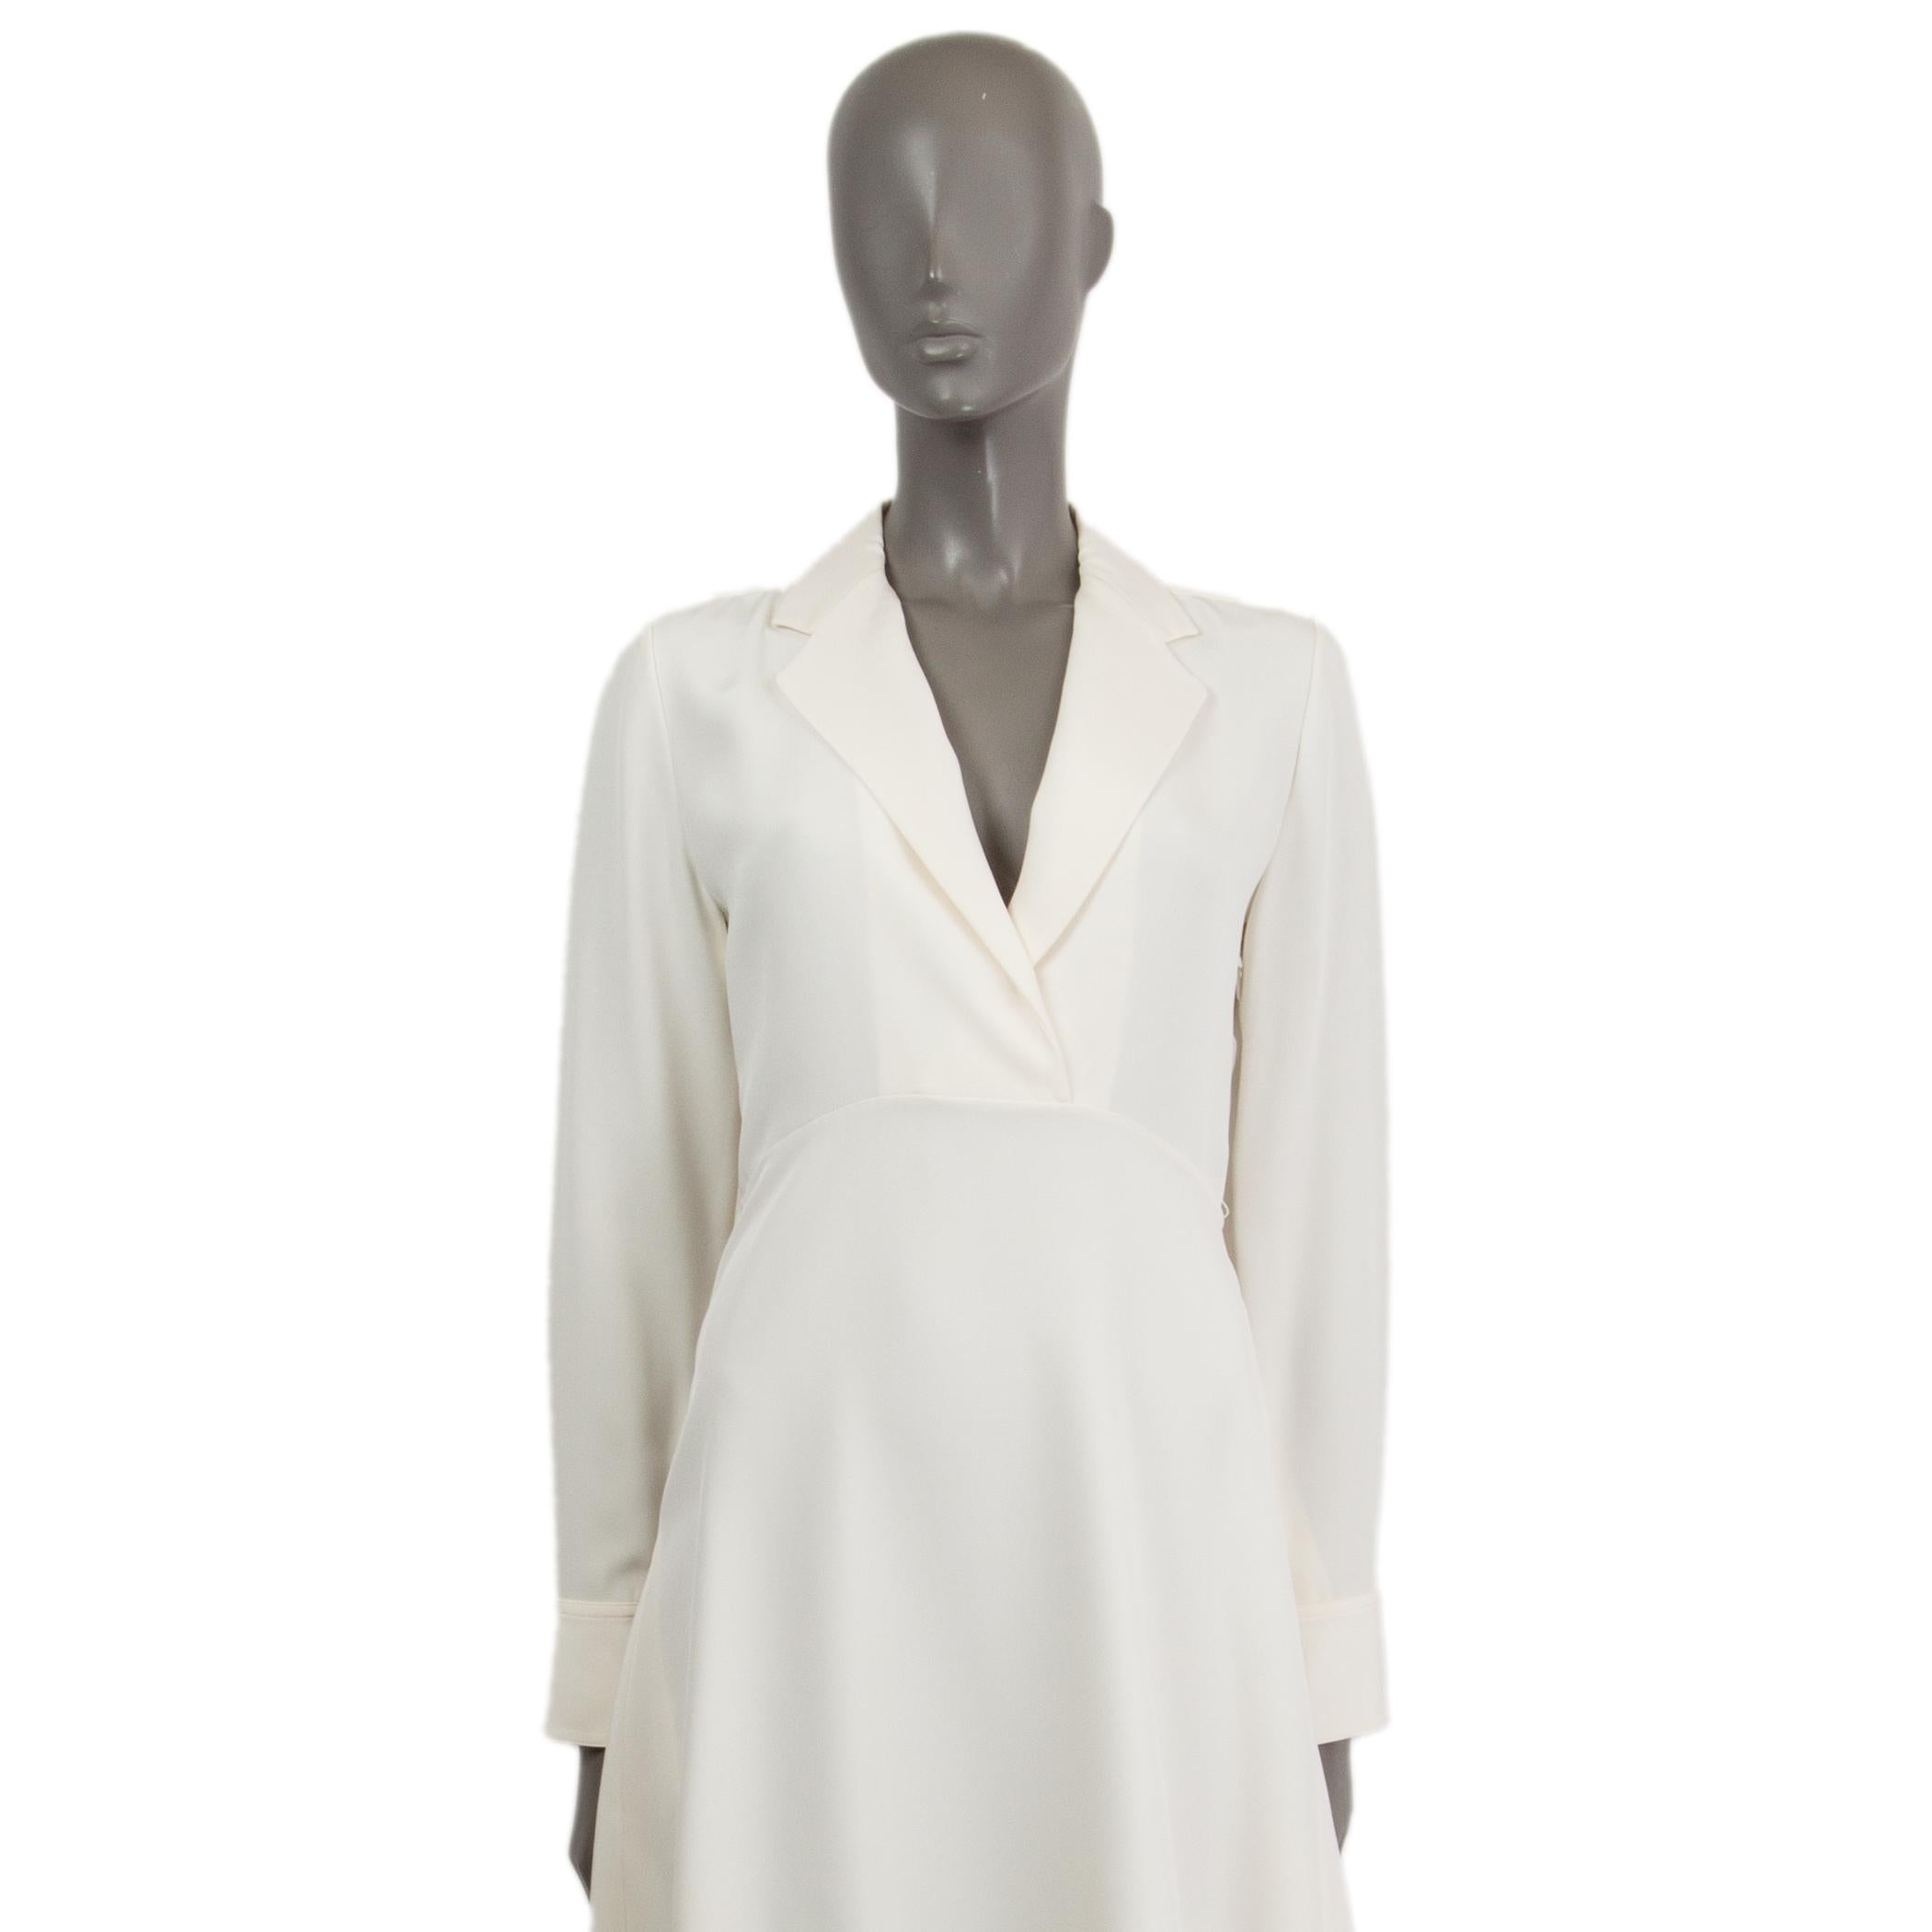 100% authentic Céline by Phoebe Philo long sleeve shirt dress in ivory silk (100%) with side pockets. Opens with a side zipper. Unlined. Has been worn and is in excellent condition. Missing belt.

Measurements
Tag Size	38
Size	S
Shoulder Width	40cm